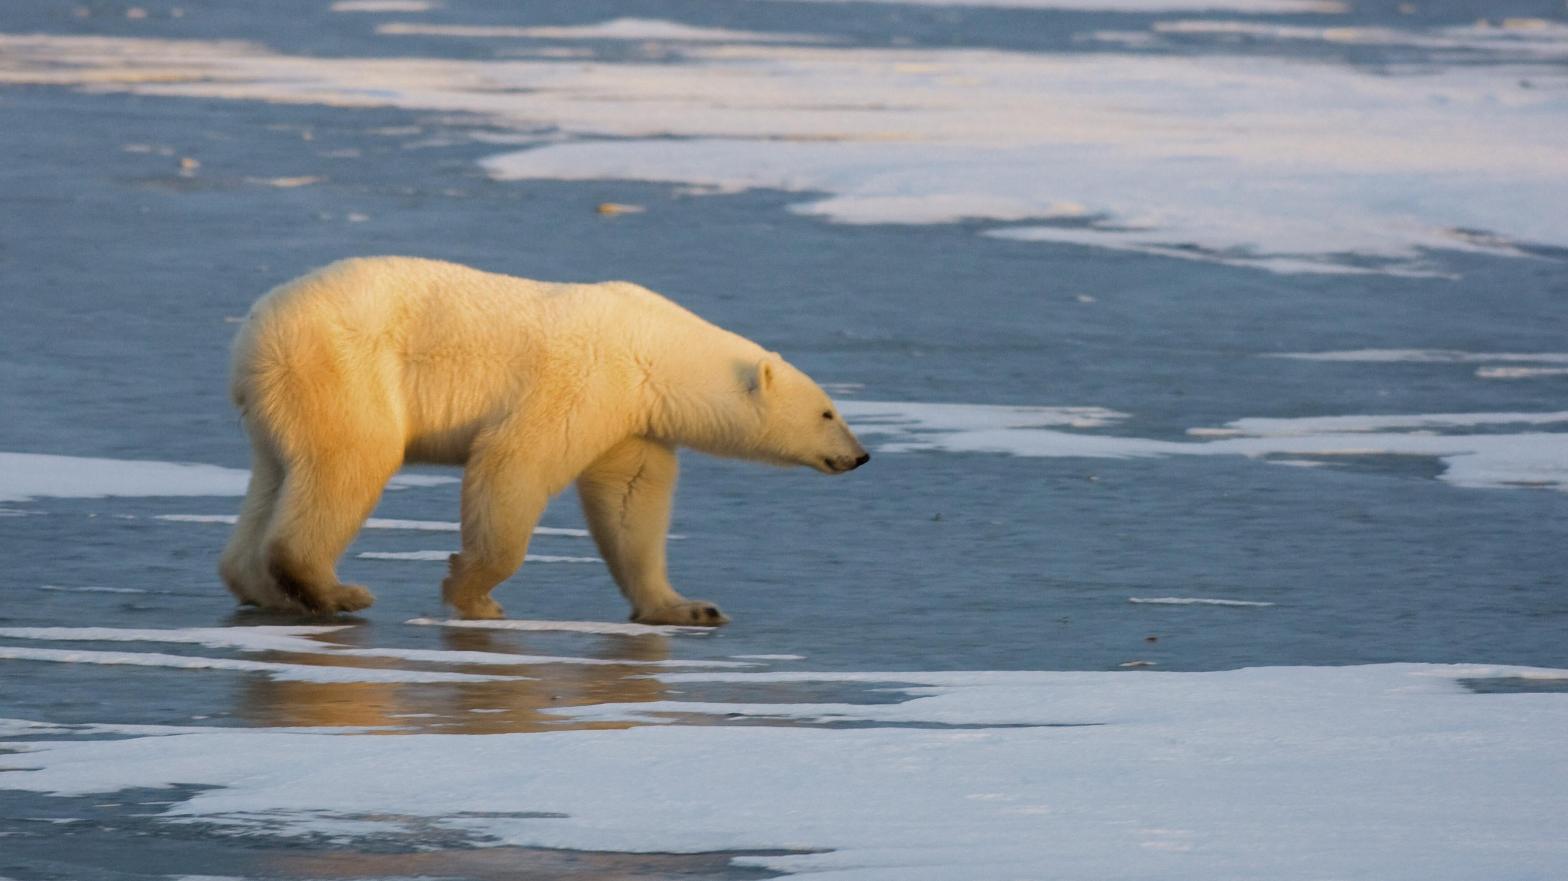 A polar bear in Hudson Bay in 2007. (Photo: PAUL J. RICHARDS/AFP, Getty Images)